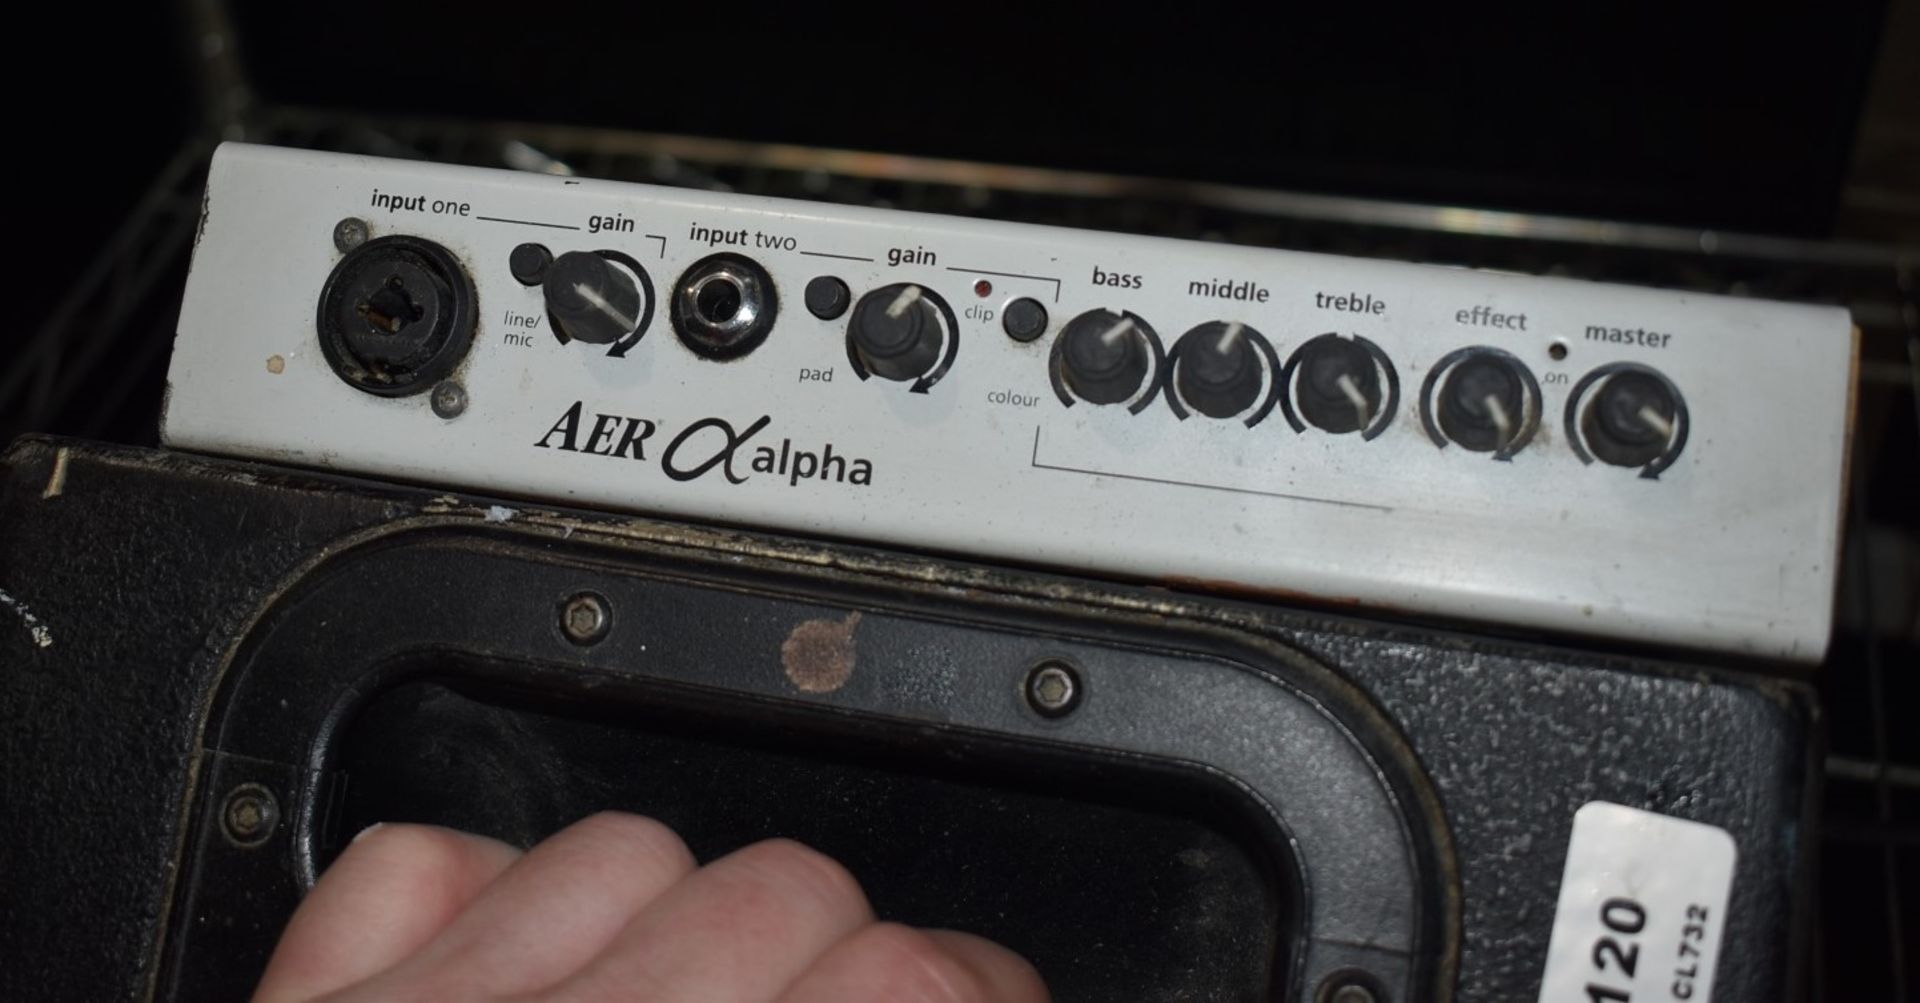 1 x AER Alpha Mini Amp For Acoustic Performers - Features 50w Output With Two Dedicated Input Jacks - Image 4 of 5